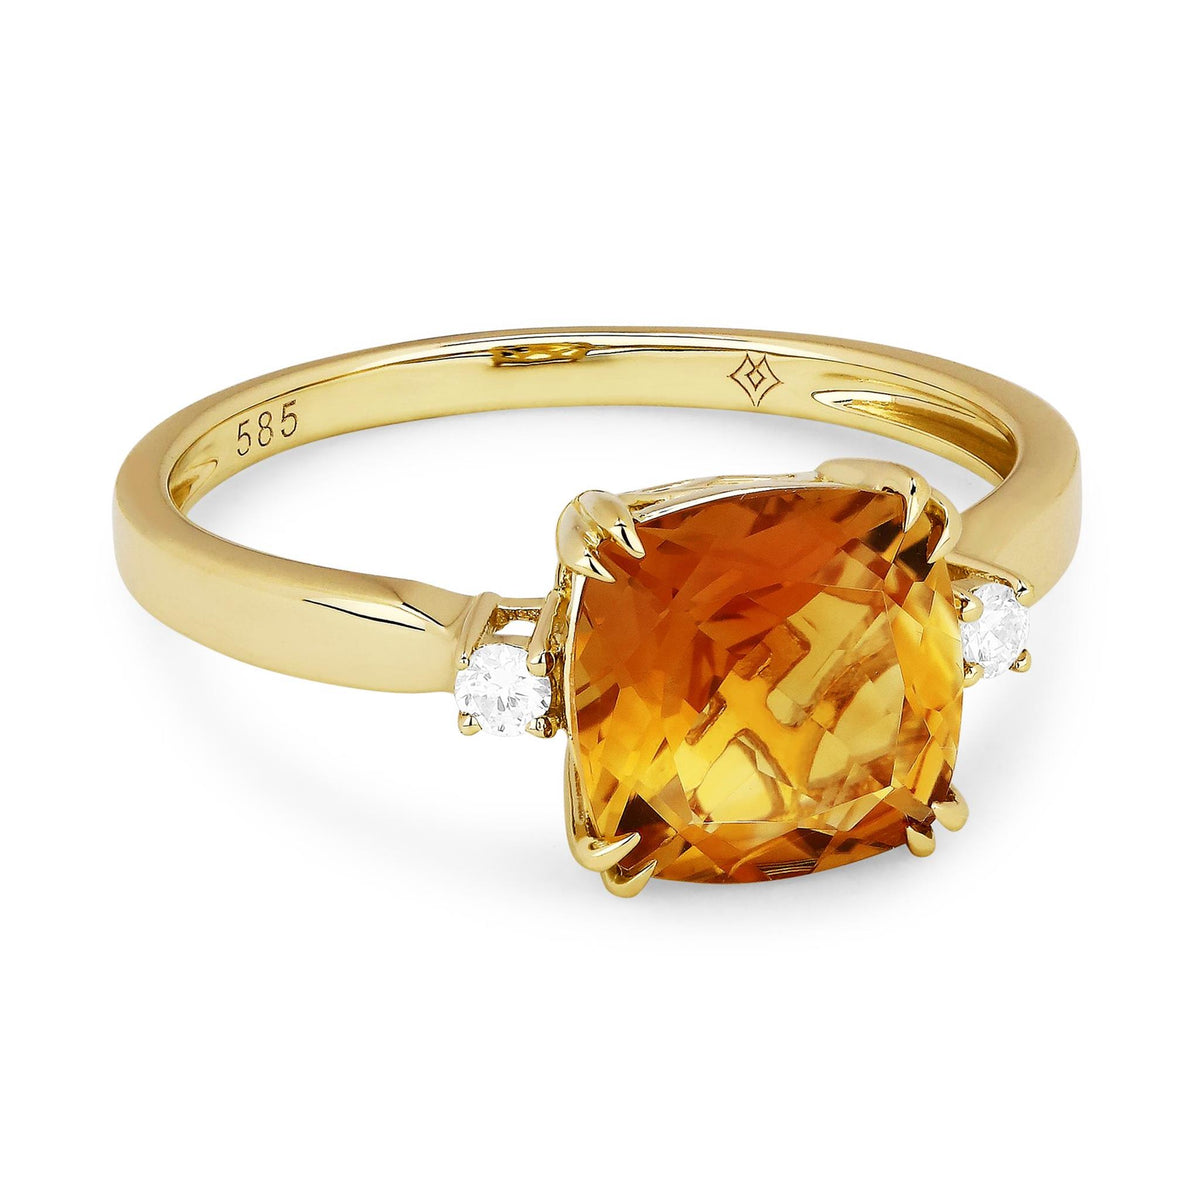 14Kt Yellow Gold Prong Set Gemstone Ring With Citrine